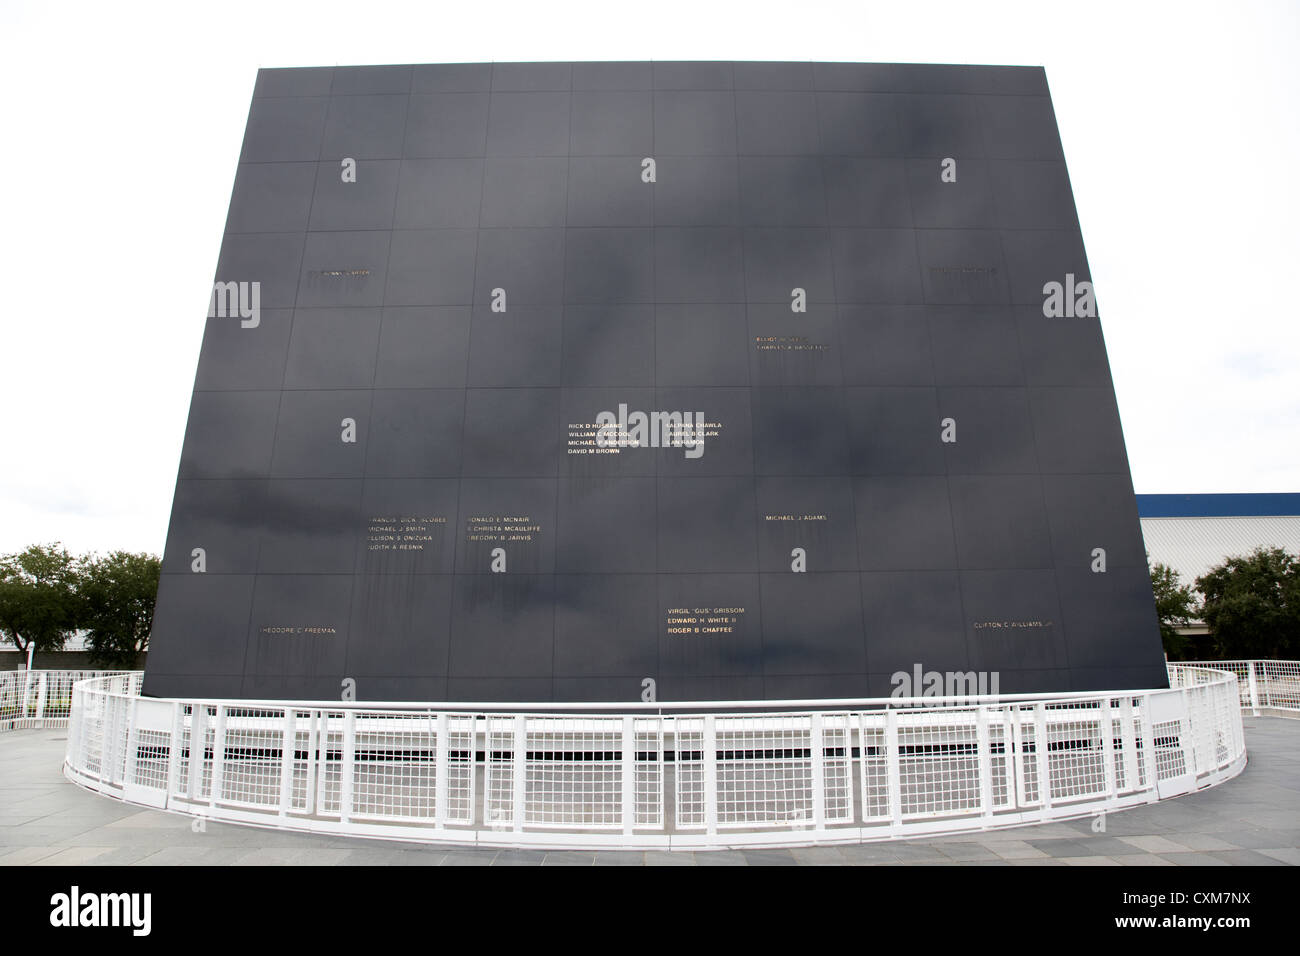 the space mirror memorial at the Kennedy Space Center Florida USA Stock Photo